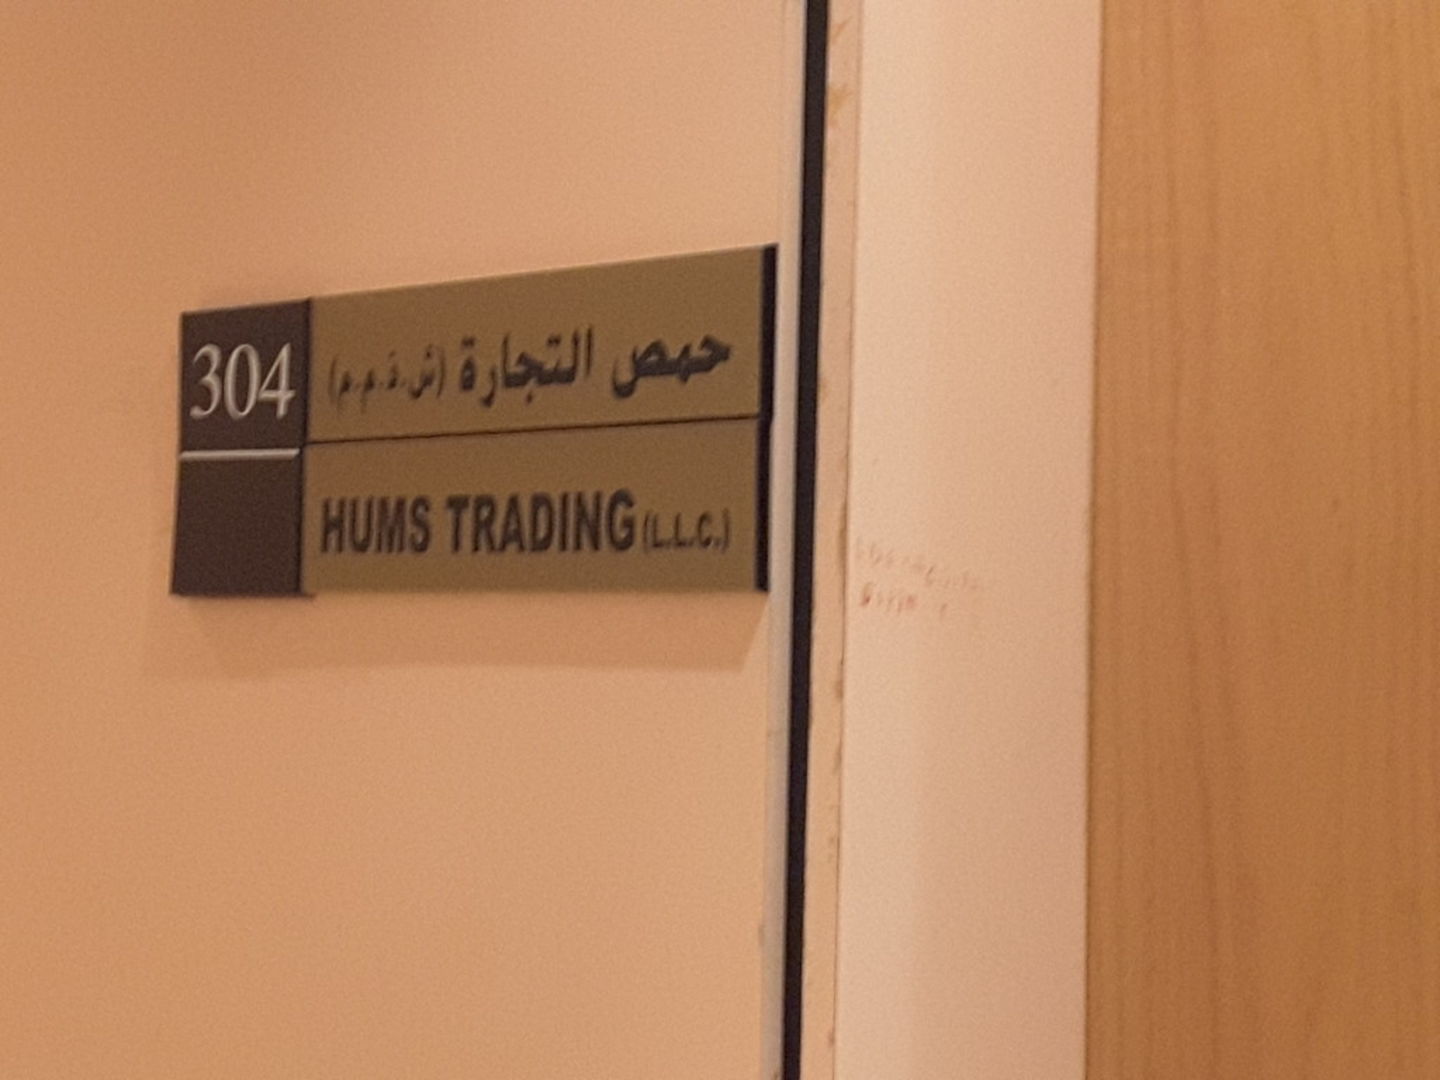 HUMS Trading